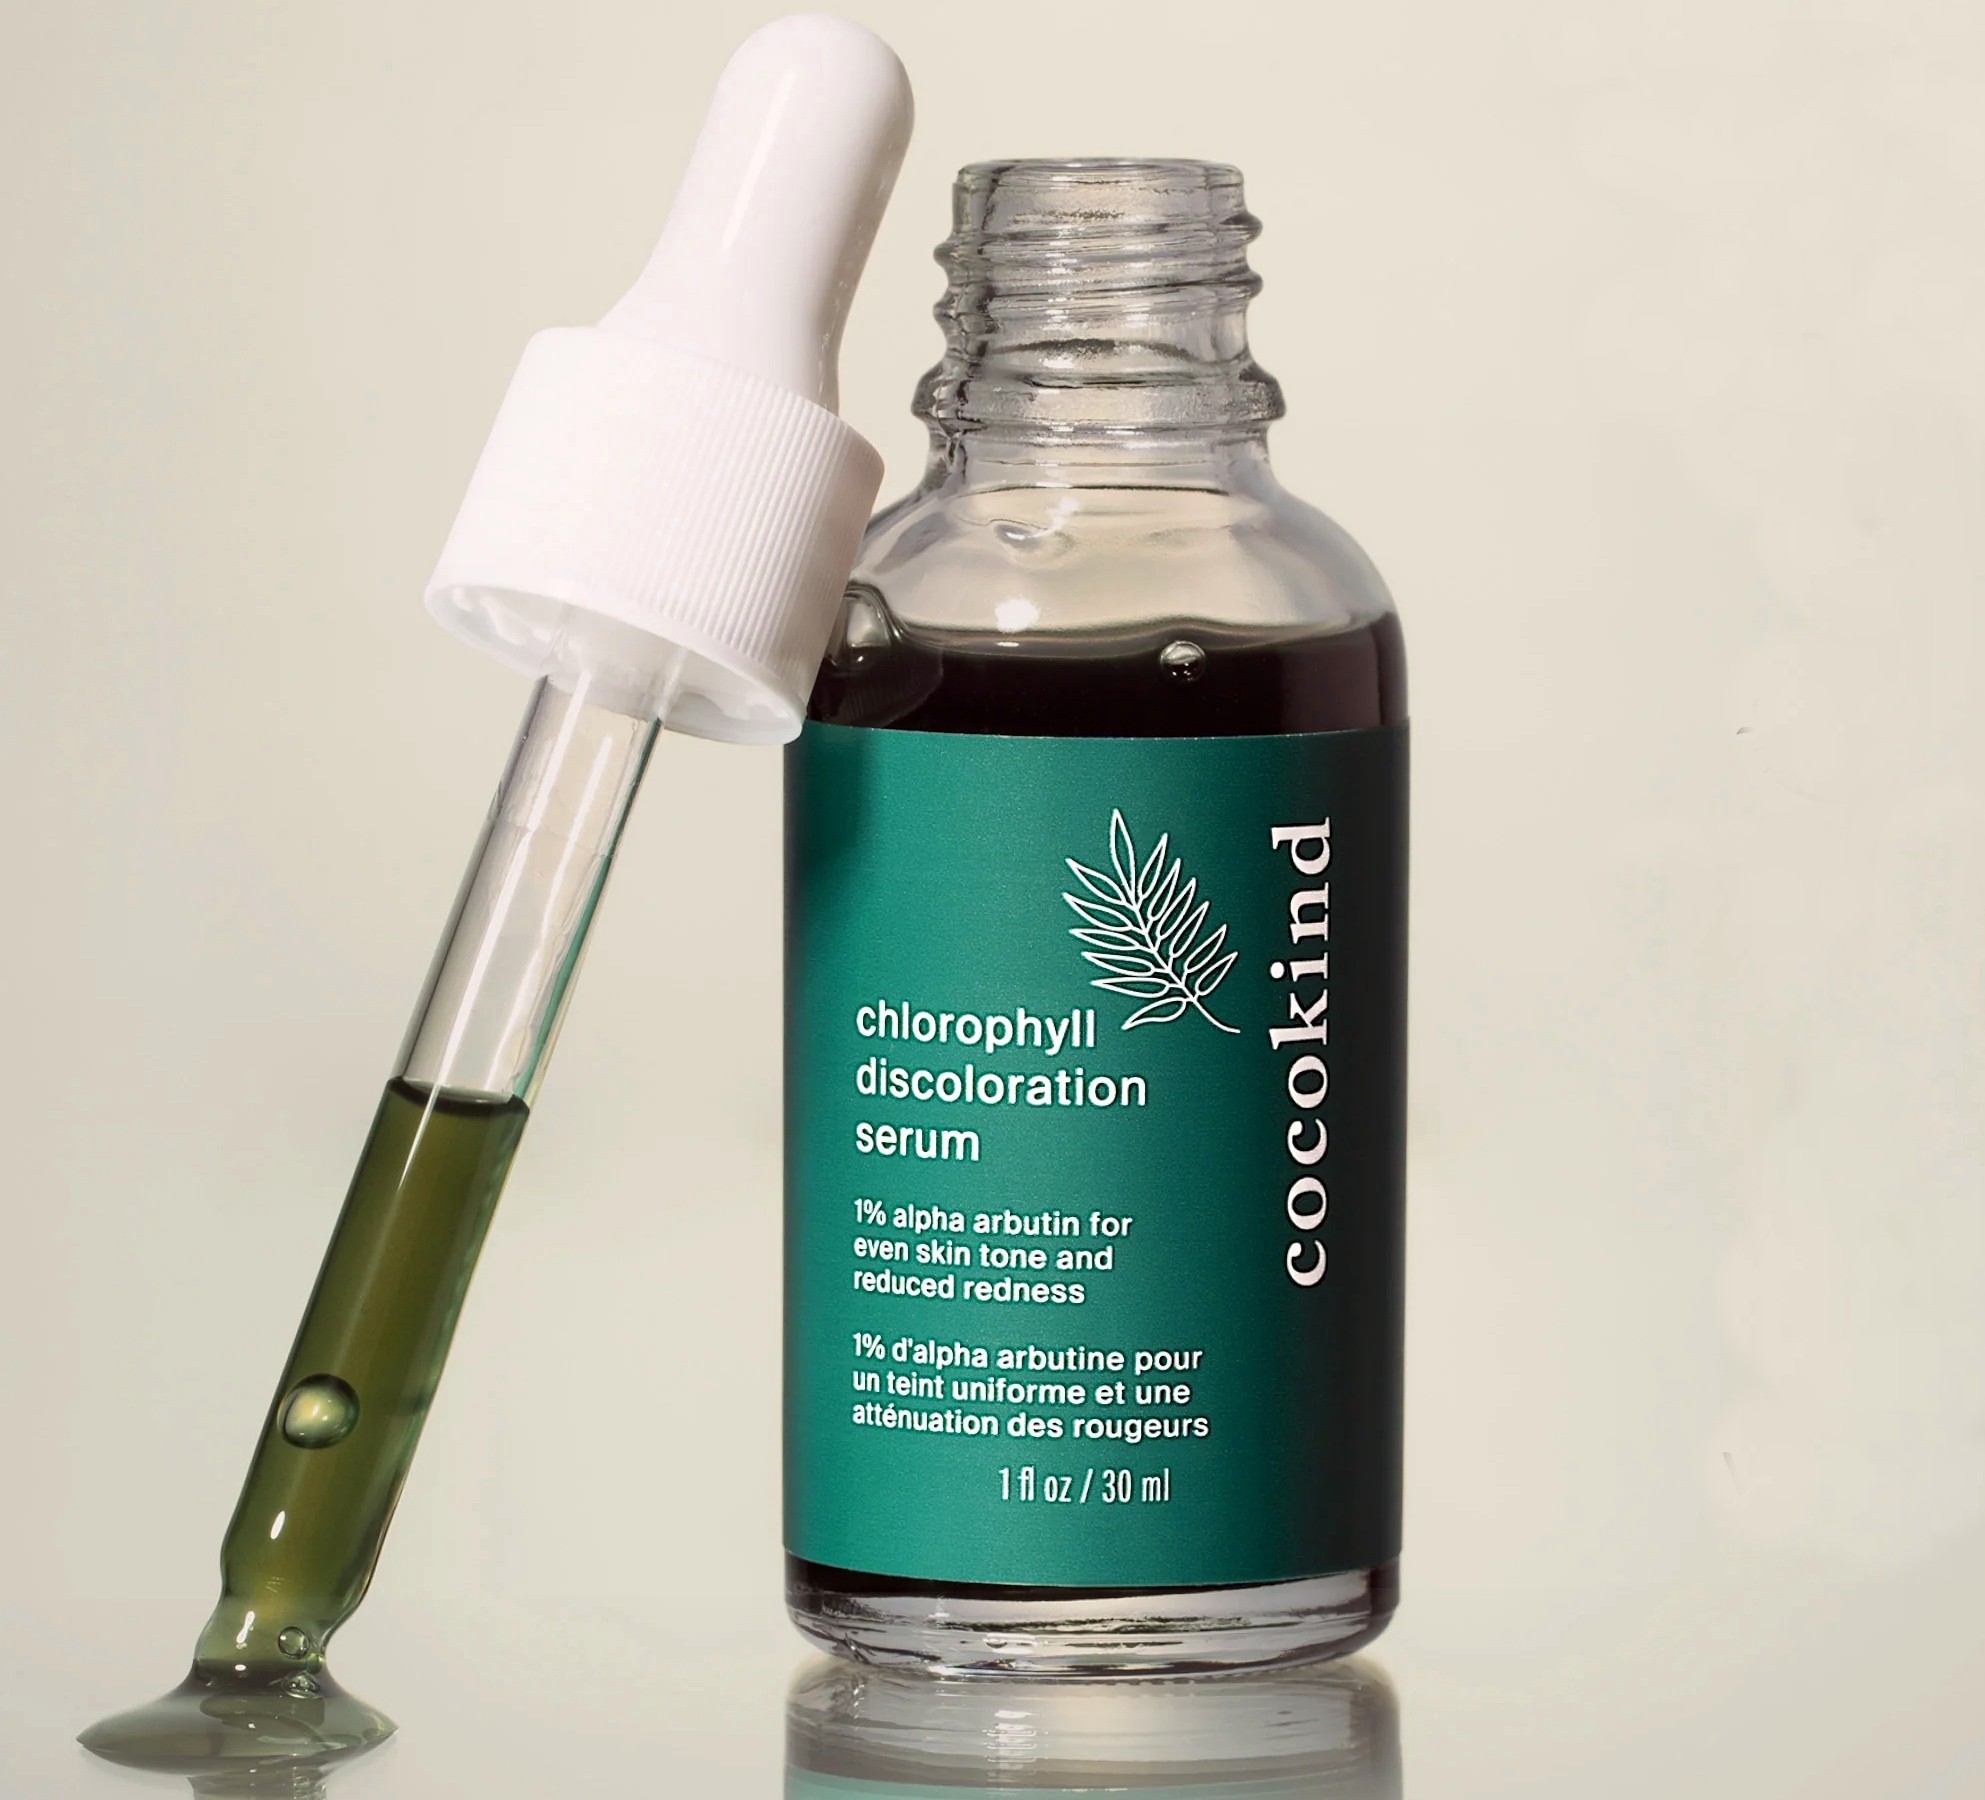 NEW in Skincare: Cocokind Chlorophyll Discoloration Serum